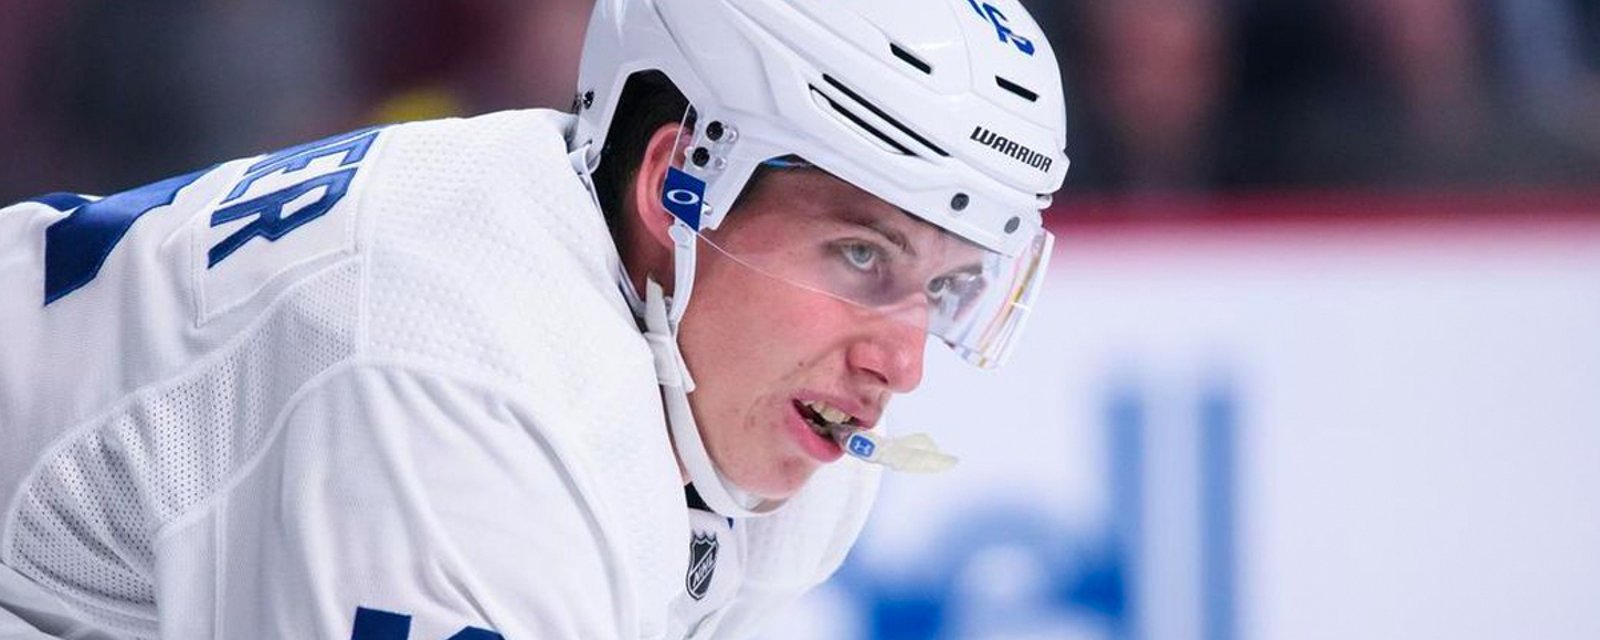 Report: Leafs offer up a stern warning to Marner amidst tense negotiations